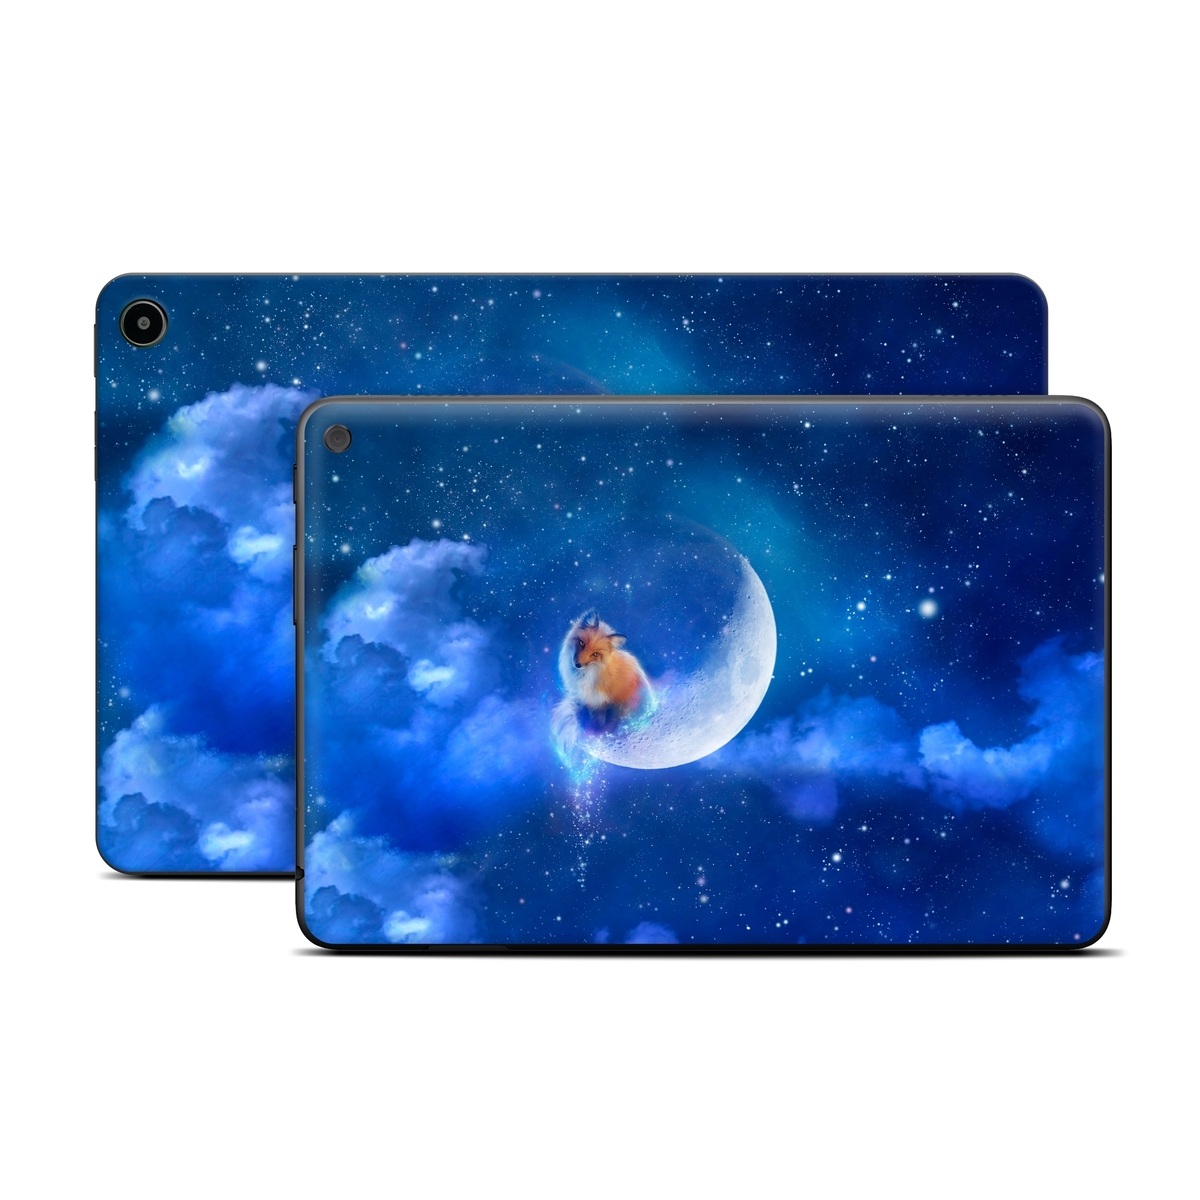 Amazon Fire Tablet Series Skin Skin design of Sky, Atmosphere, Astronomical object, Outer space, Space, Universe, Illustration, Nebula, Galaxy, Fictional character, with blue, black, gray colors